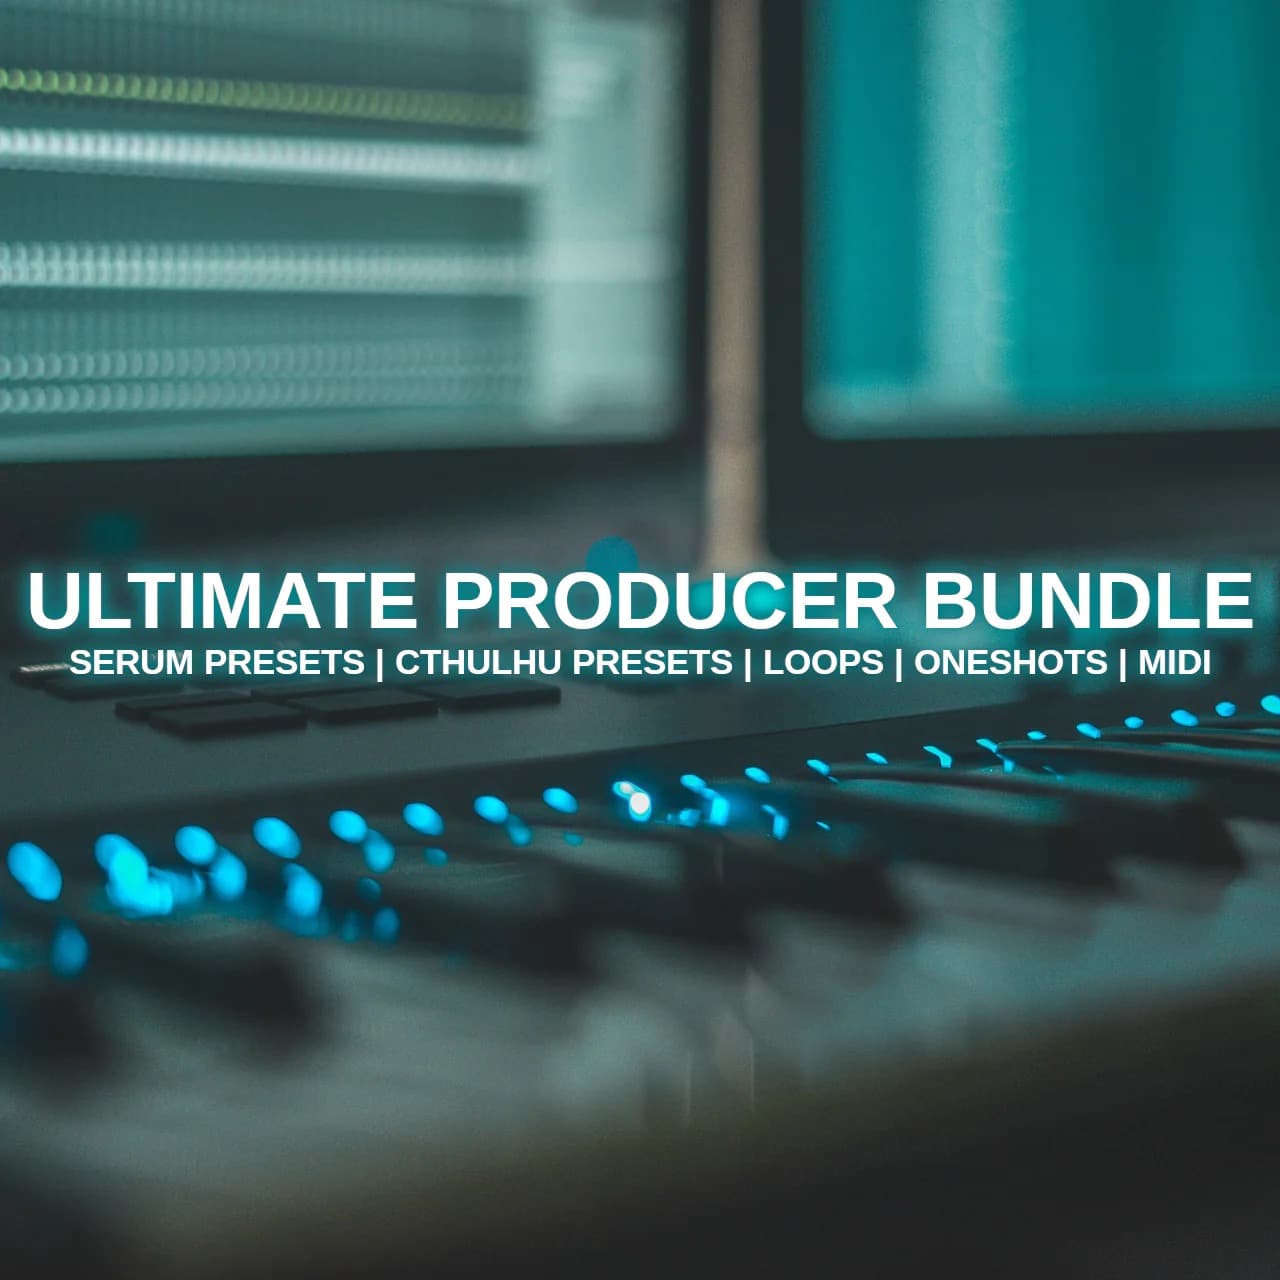 98% off “Ultimate Producer Bundle” by Glitchedtones